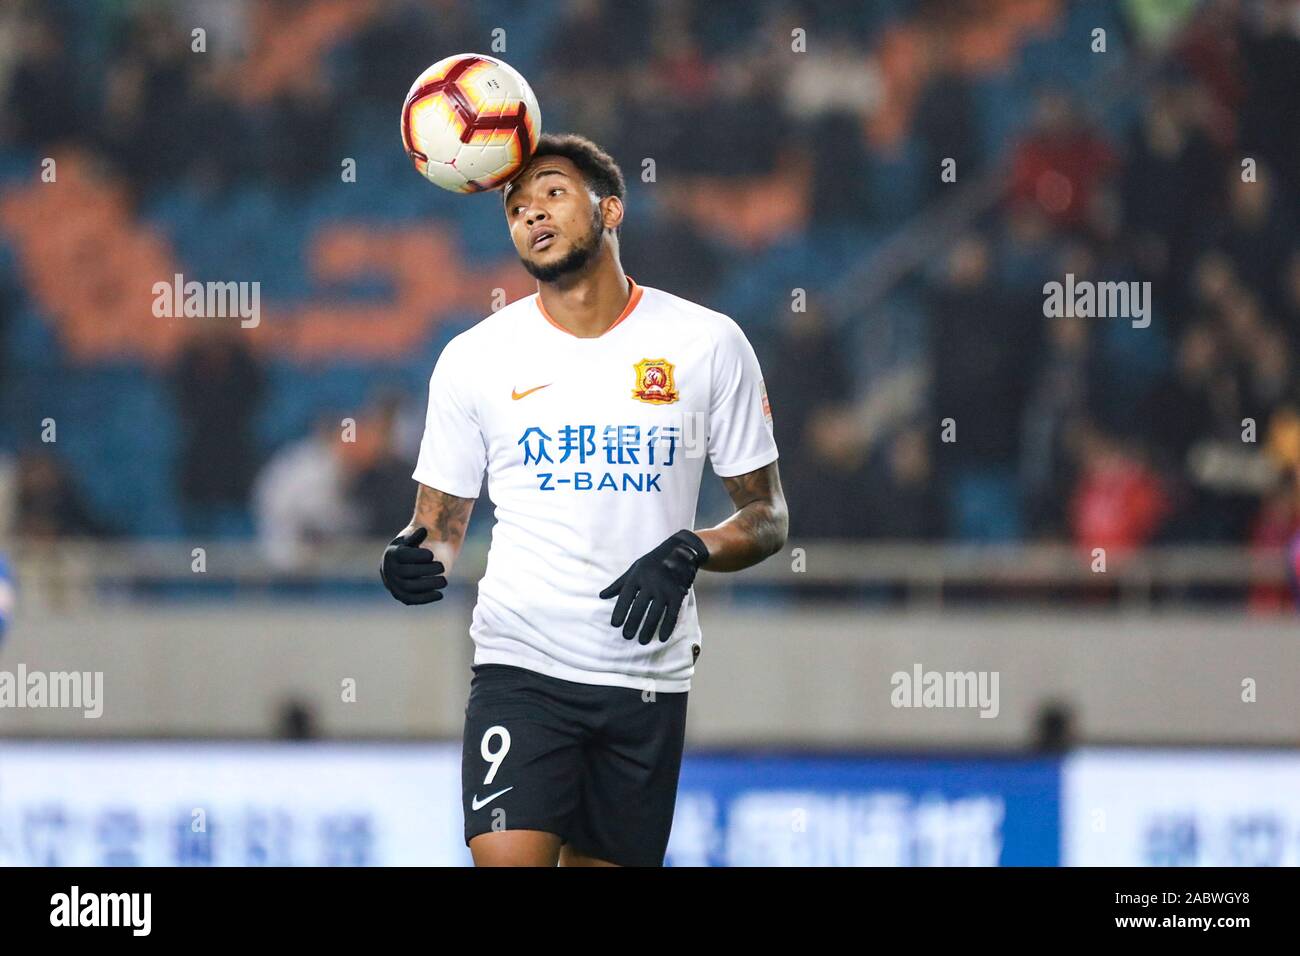 Brazilian football player Rafael Pereira da Silva, commonly known as Rafael or Rafael da Silva, of Wuhan Zall F.C. keeps the ball during the 29th round match of Chinese Football Association Super League (CSL) against Chongqing SWM in Chongqing, China, 27 November 2019. Chongqing SWM was defeated by Wuhan Zall with 0-1. Stock Photo